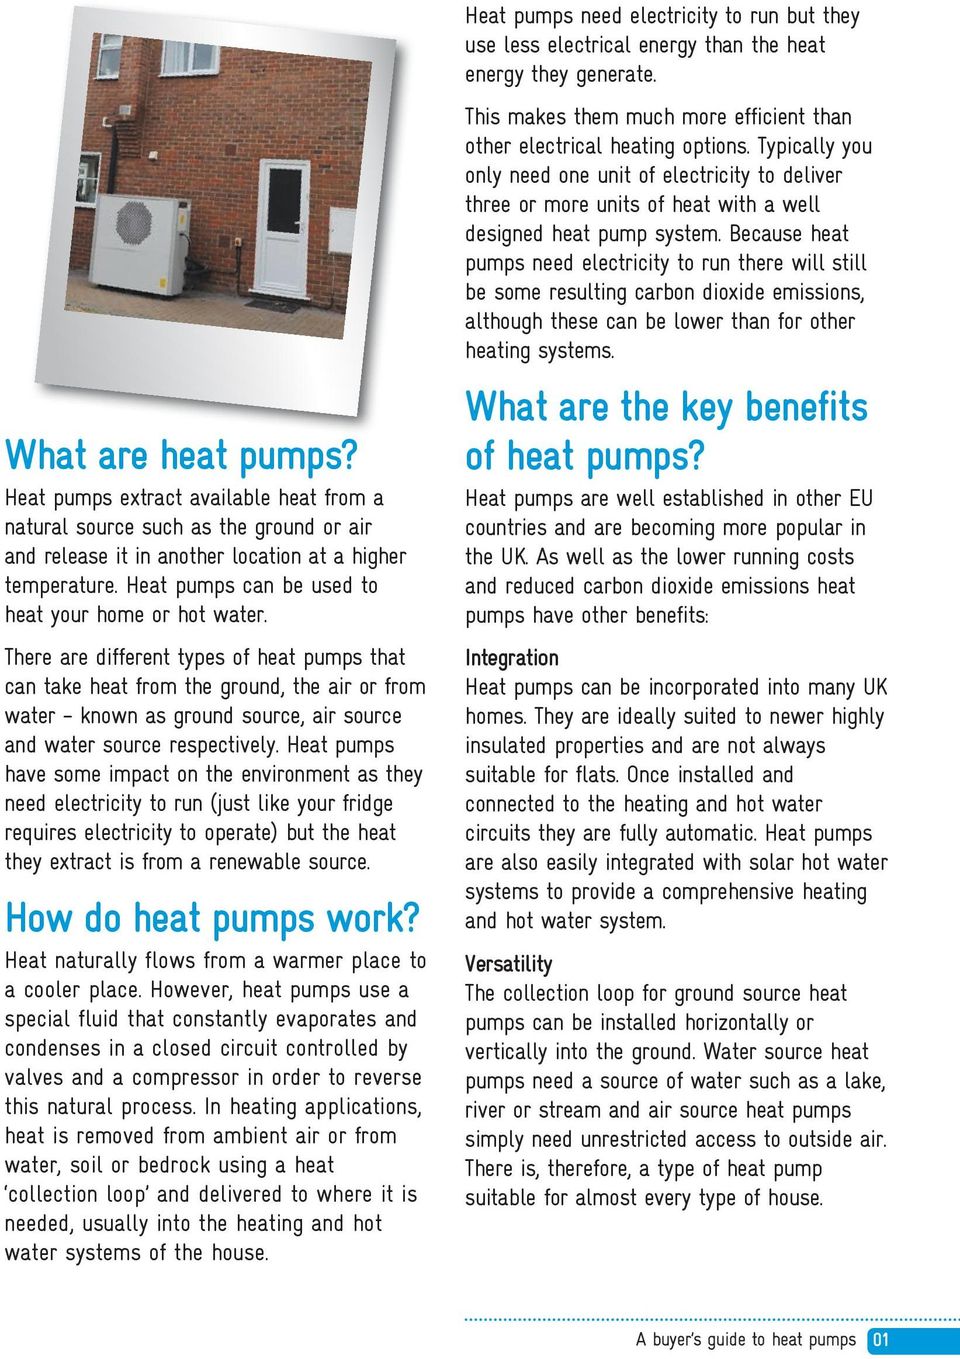 There are different types of heat pumps that can take heat from the ground, the air or from water - known as ground source, air source and water source respectively.